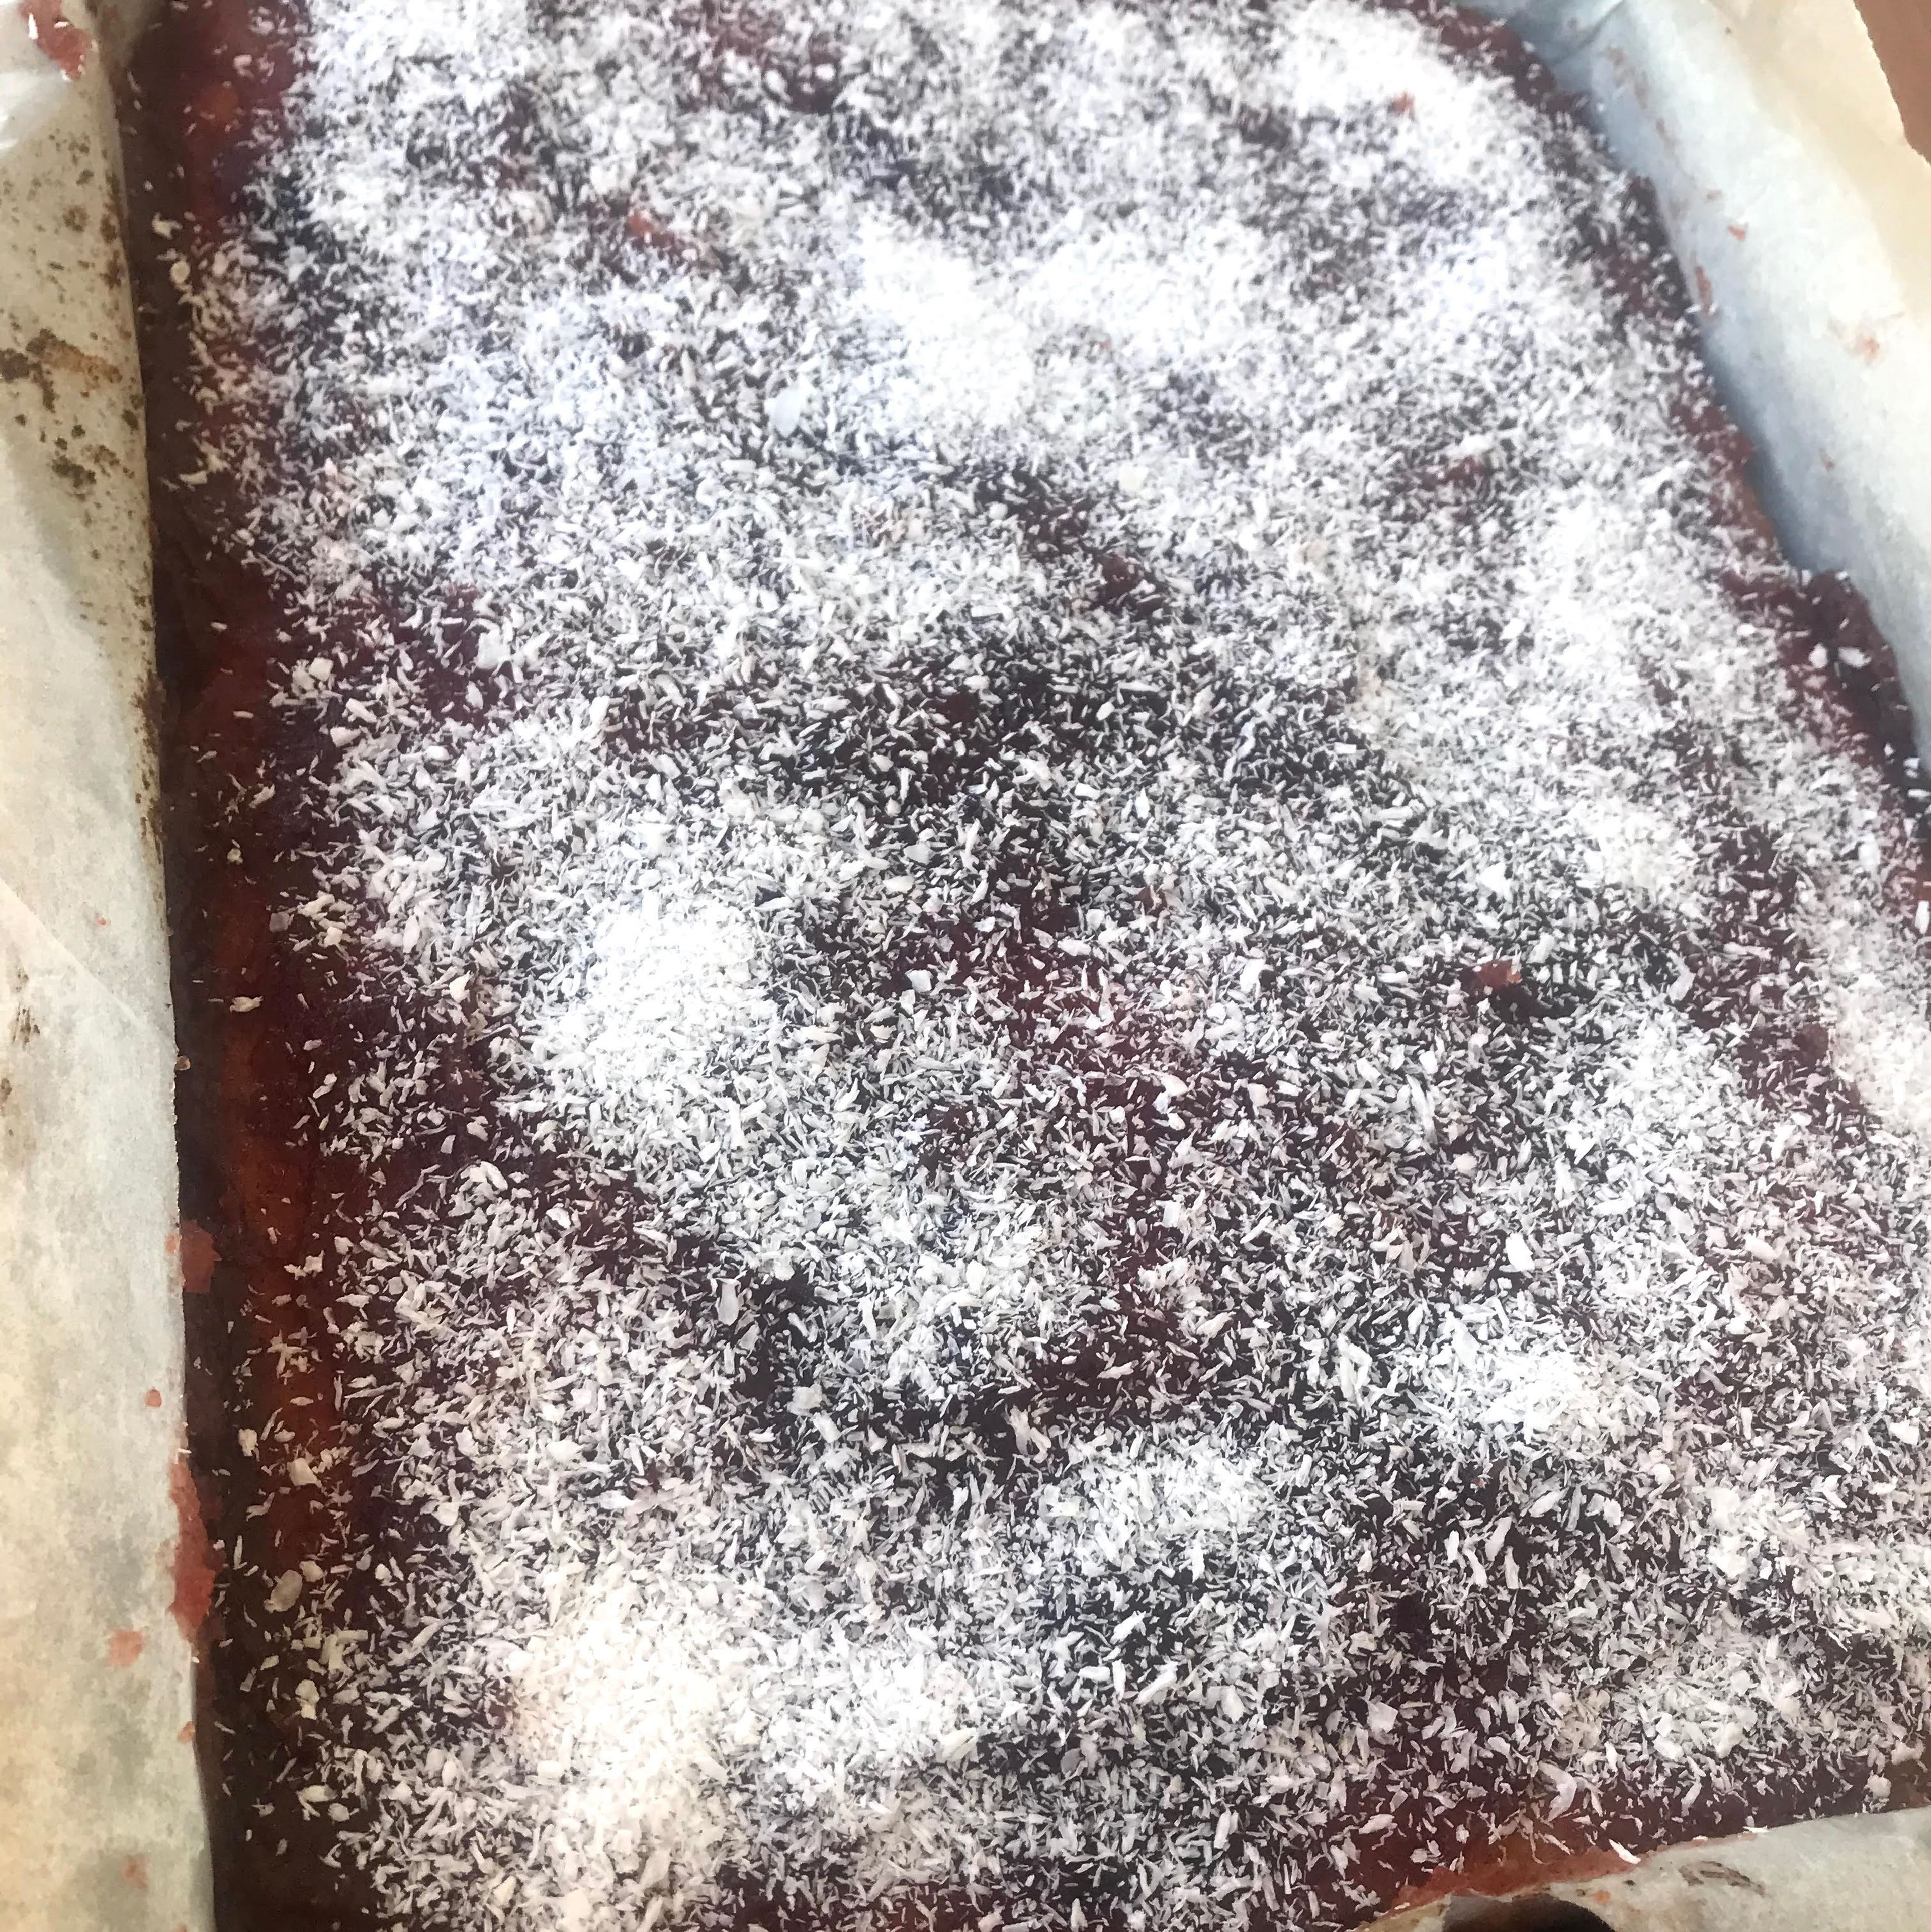 When ready take out of the oven,spread the jam over the top of the warm sponge and sprinkle with coconut.